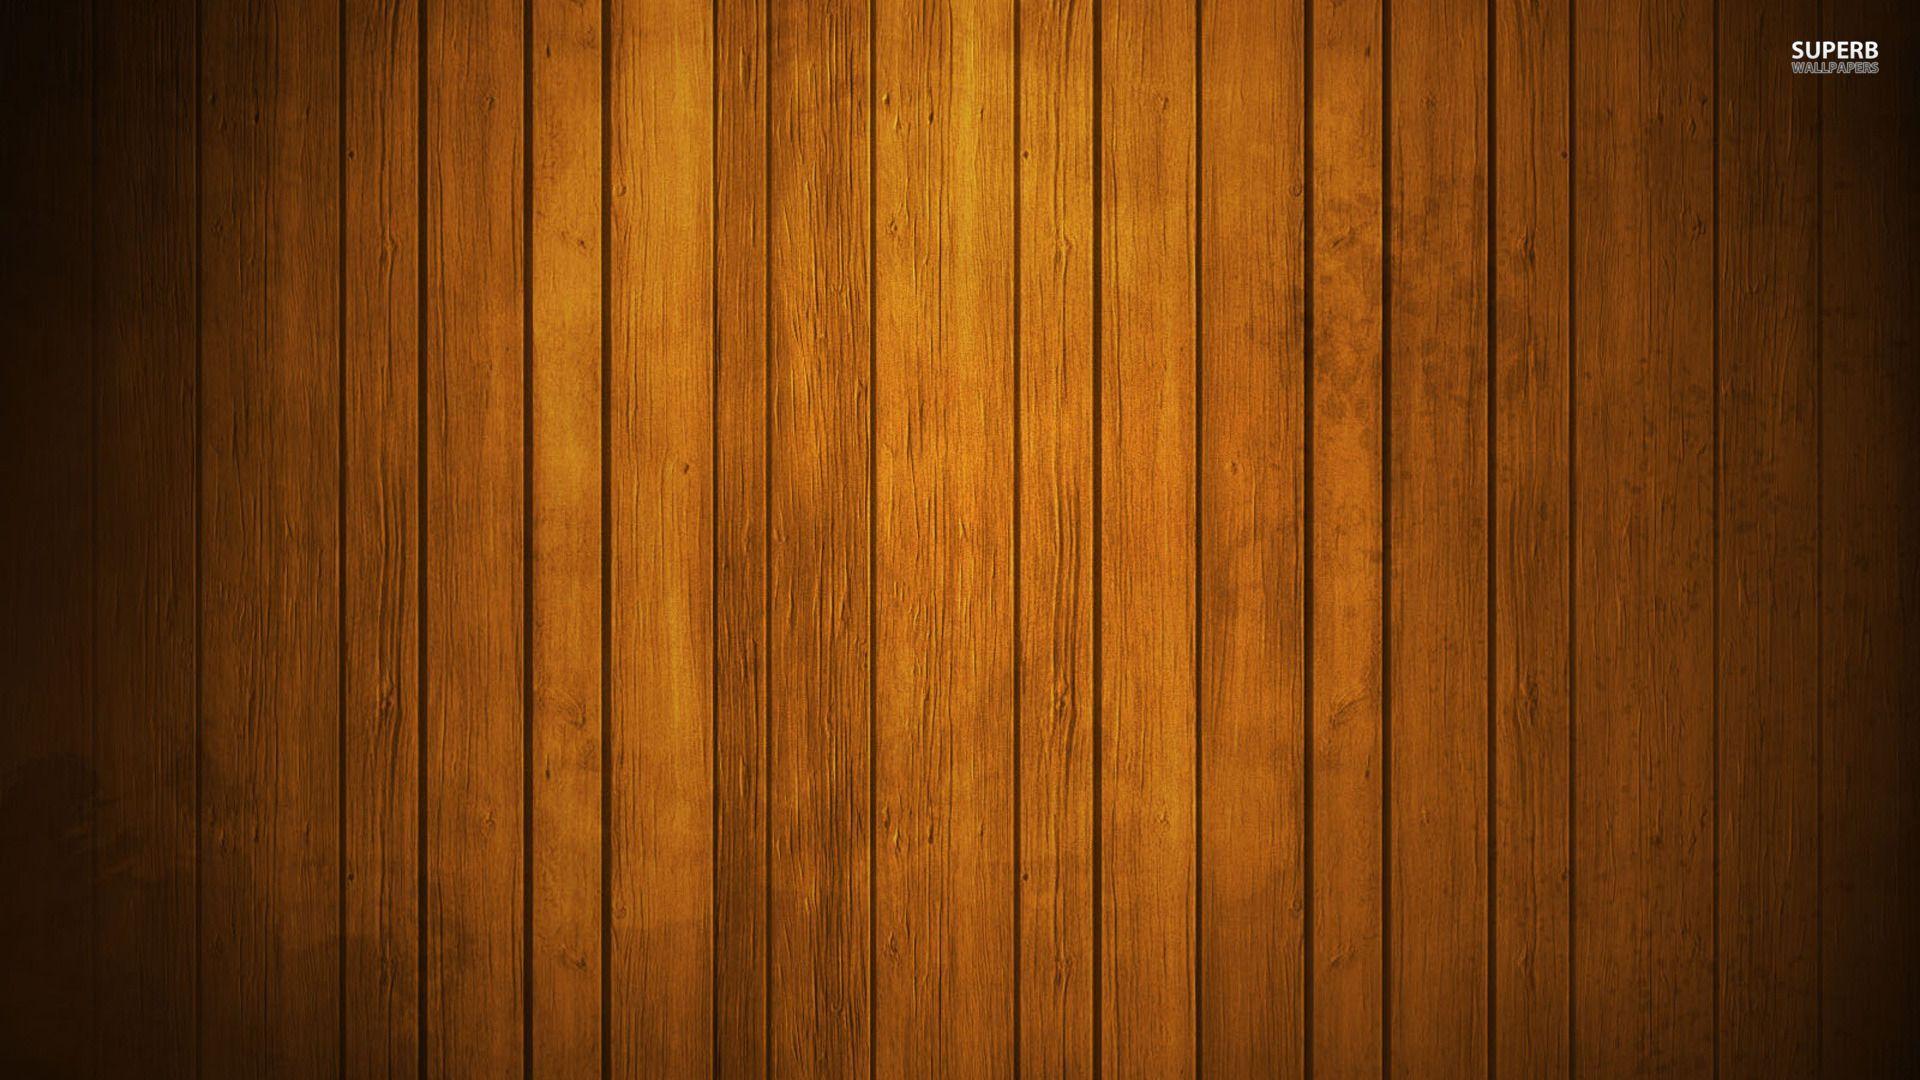 190 Artistic Wood HD Wallpapers and Backgrounds